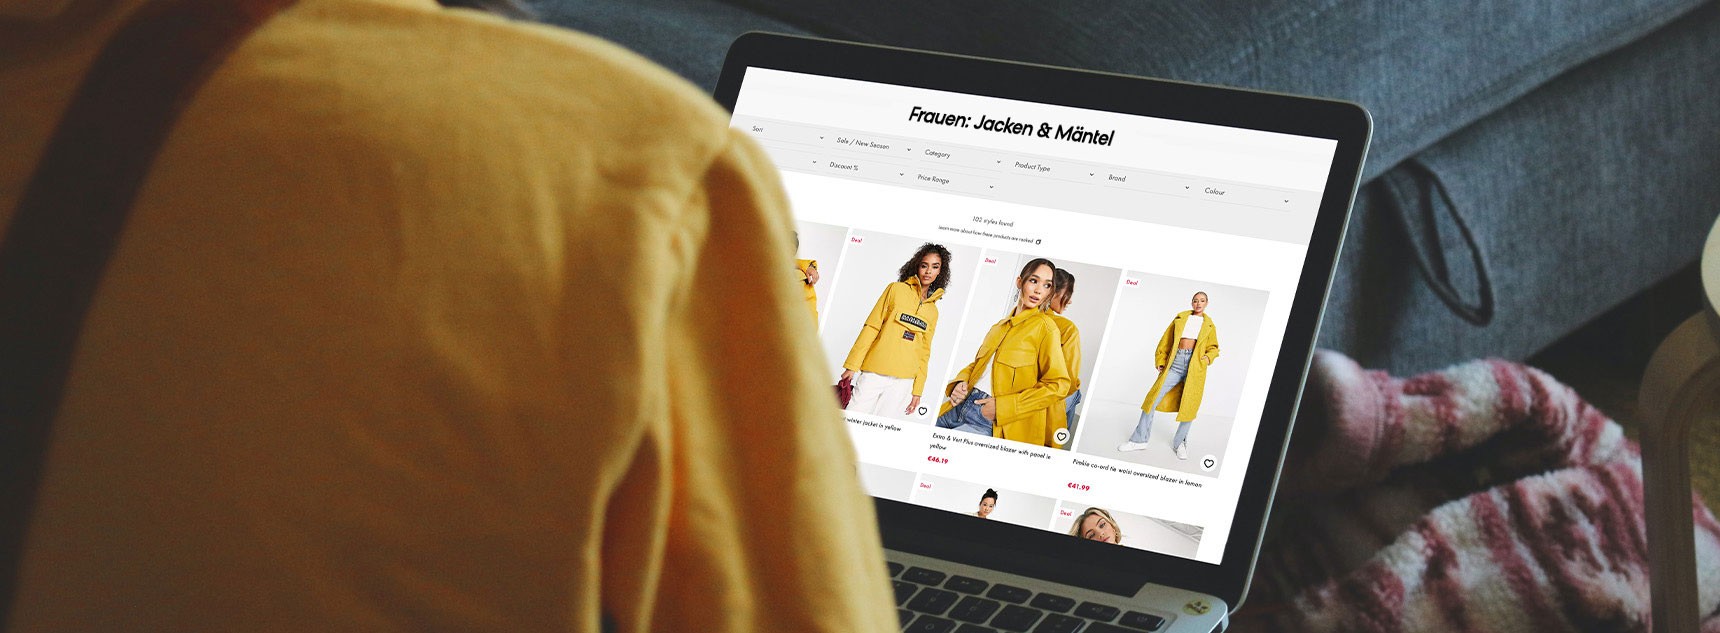 Example of using AI in online shopping to show relevant results